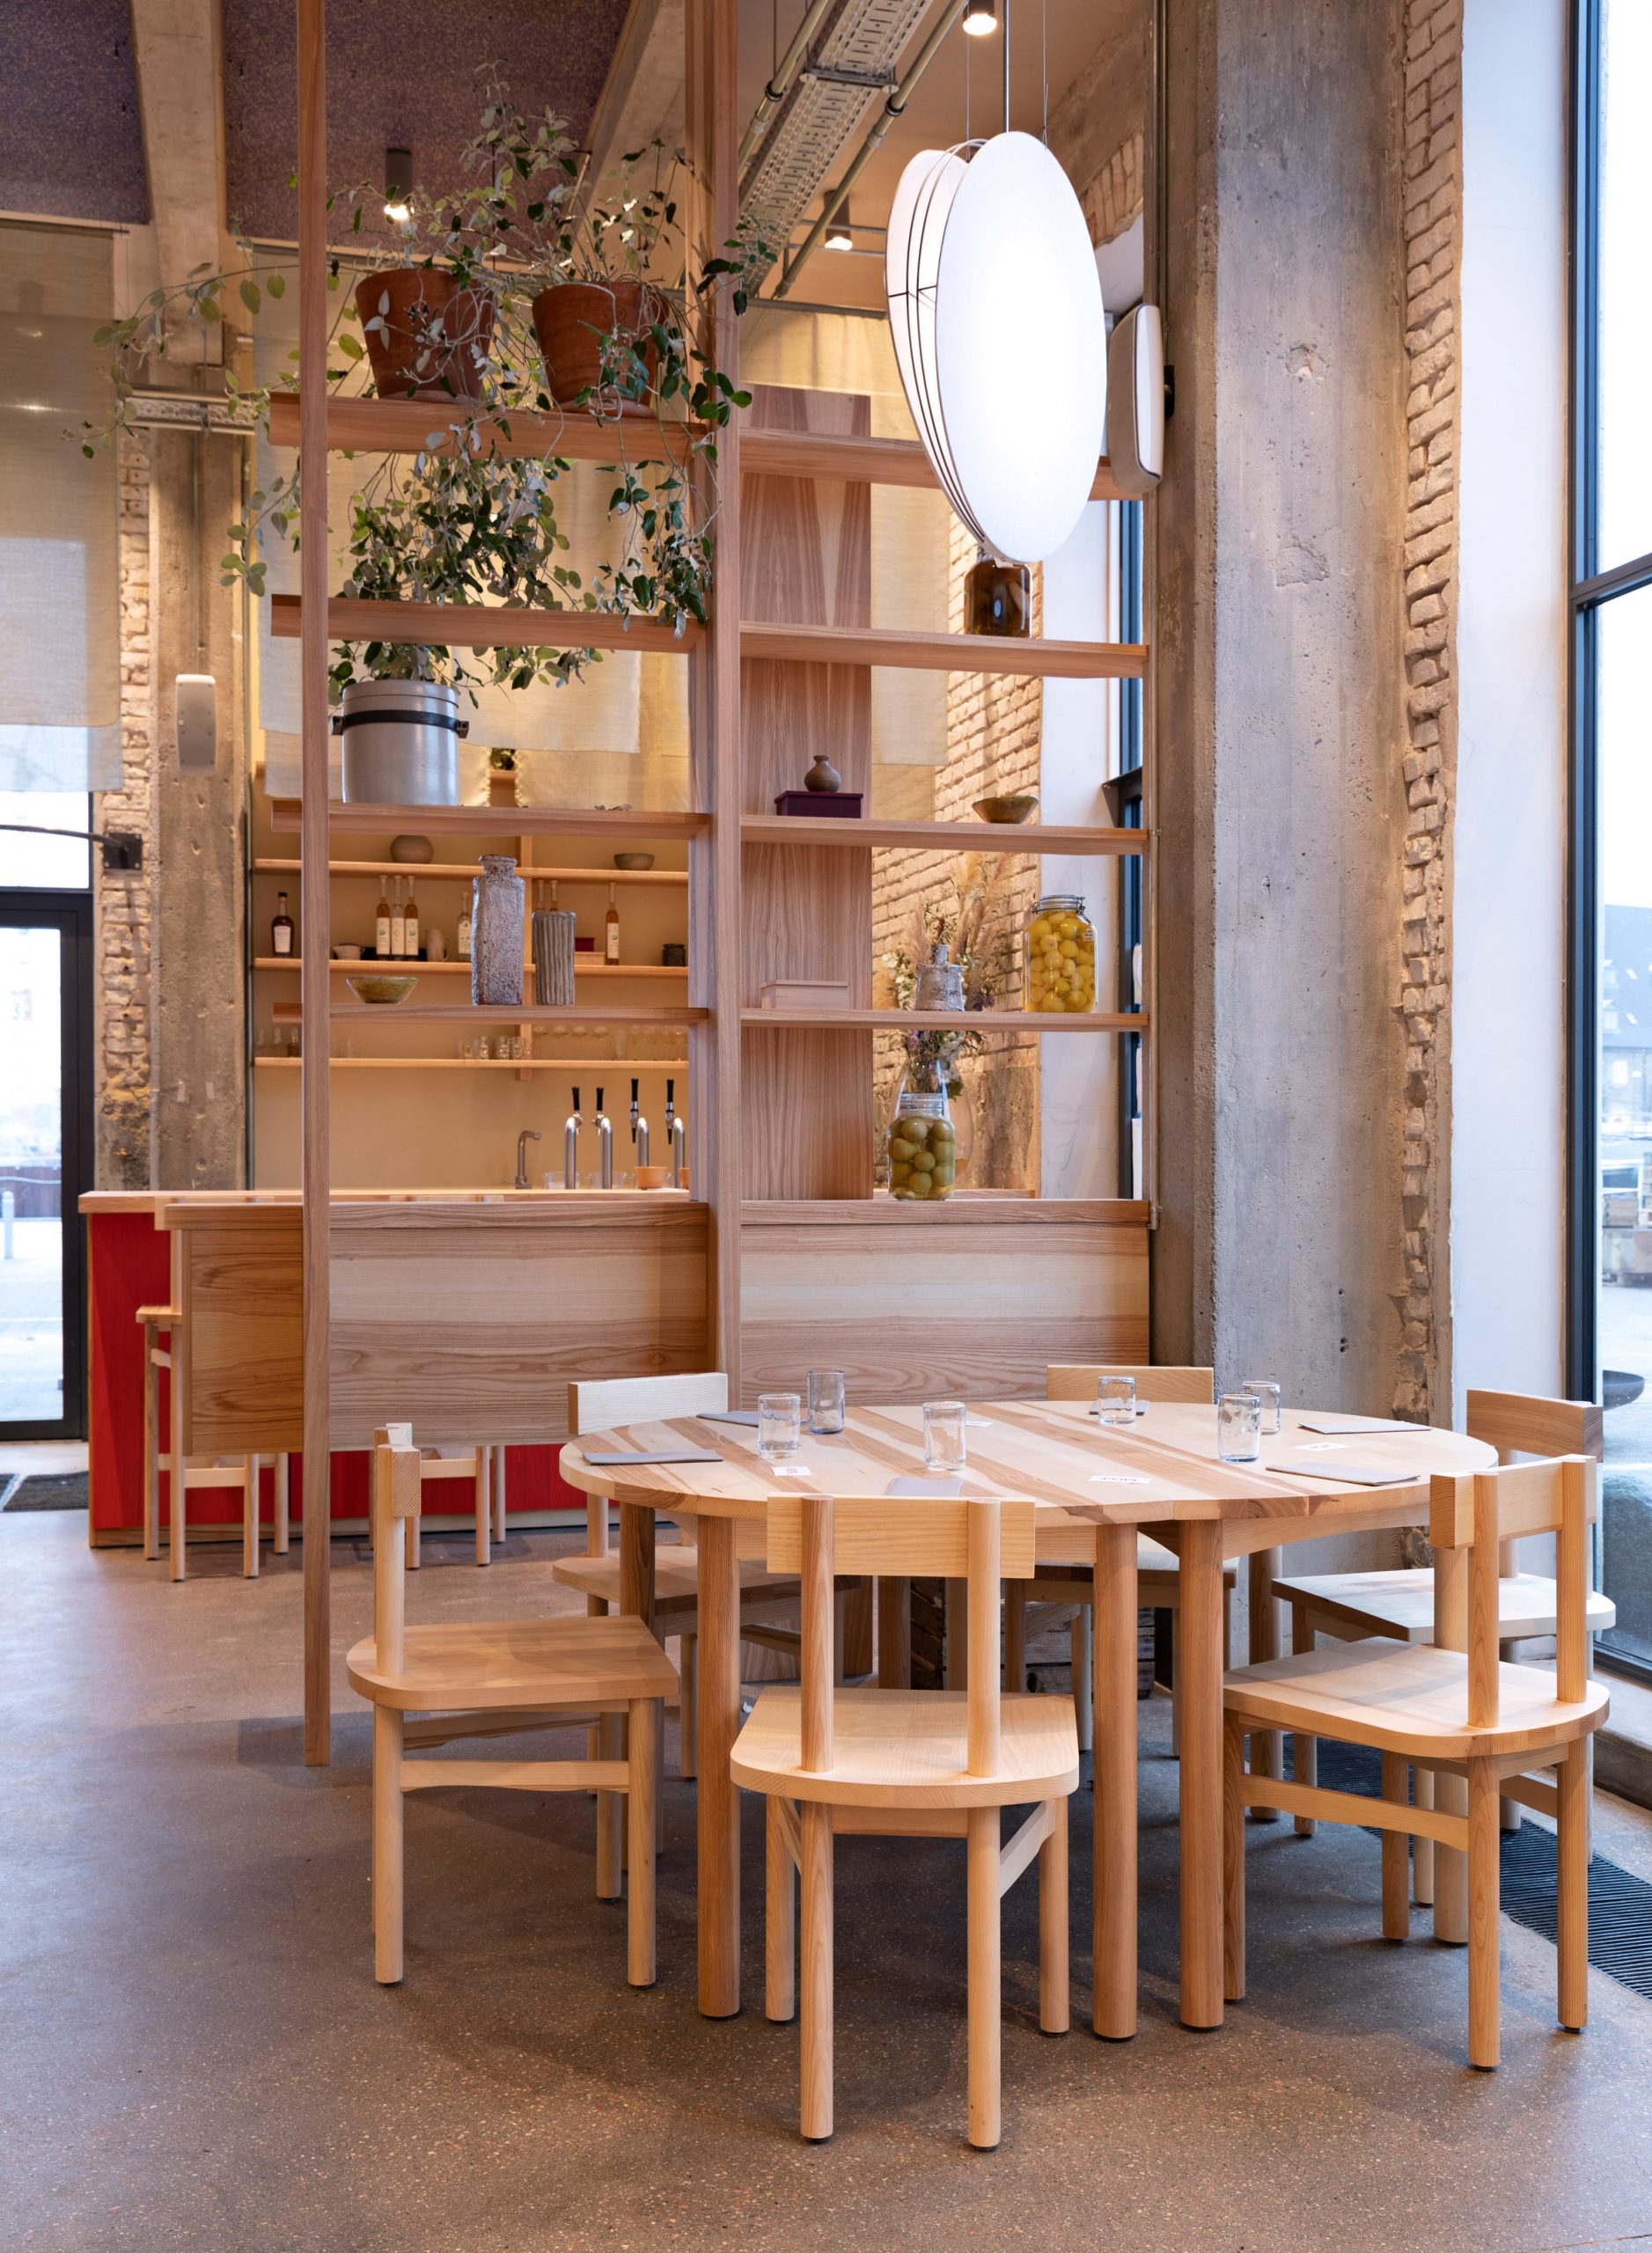 Wooden furniture in POPL burger restaurant by Spacon & X and e15 for Noma